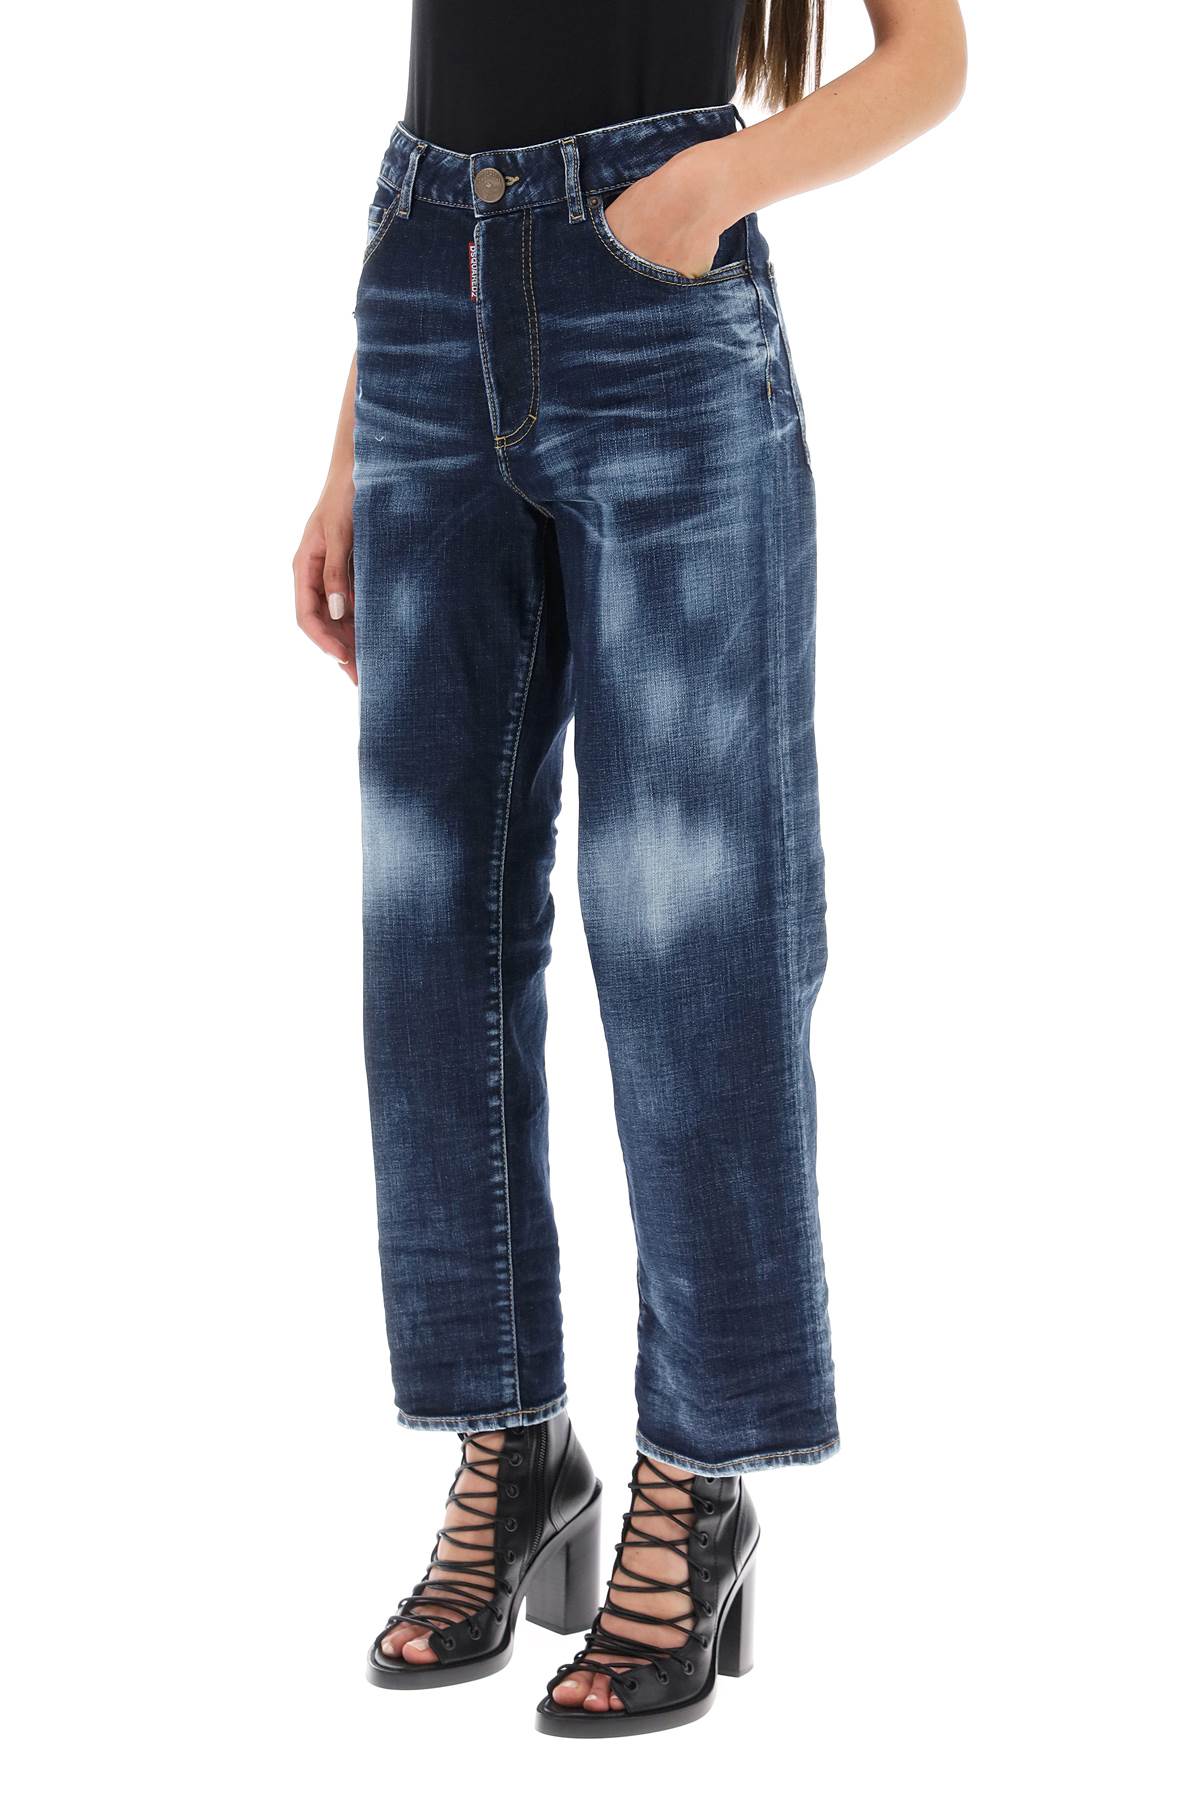 Dsquared2 'boston' cropped jeans-3